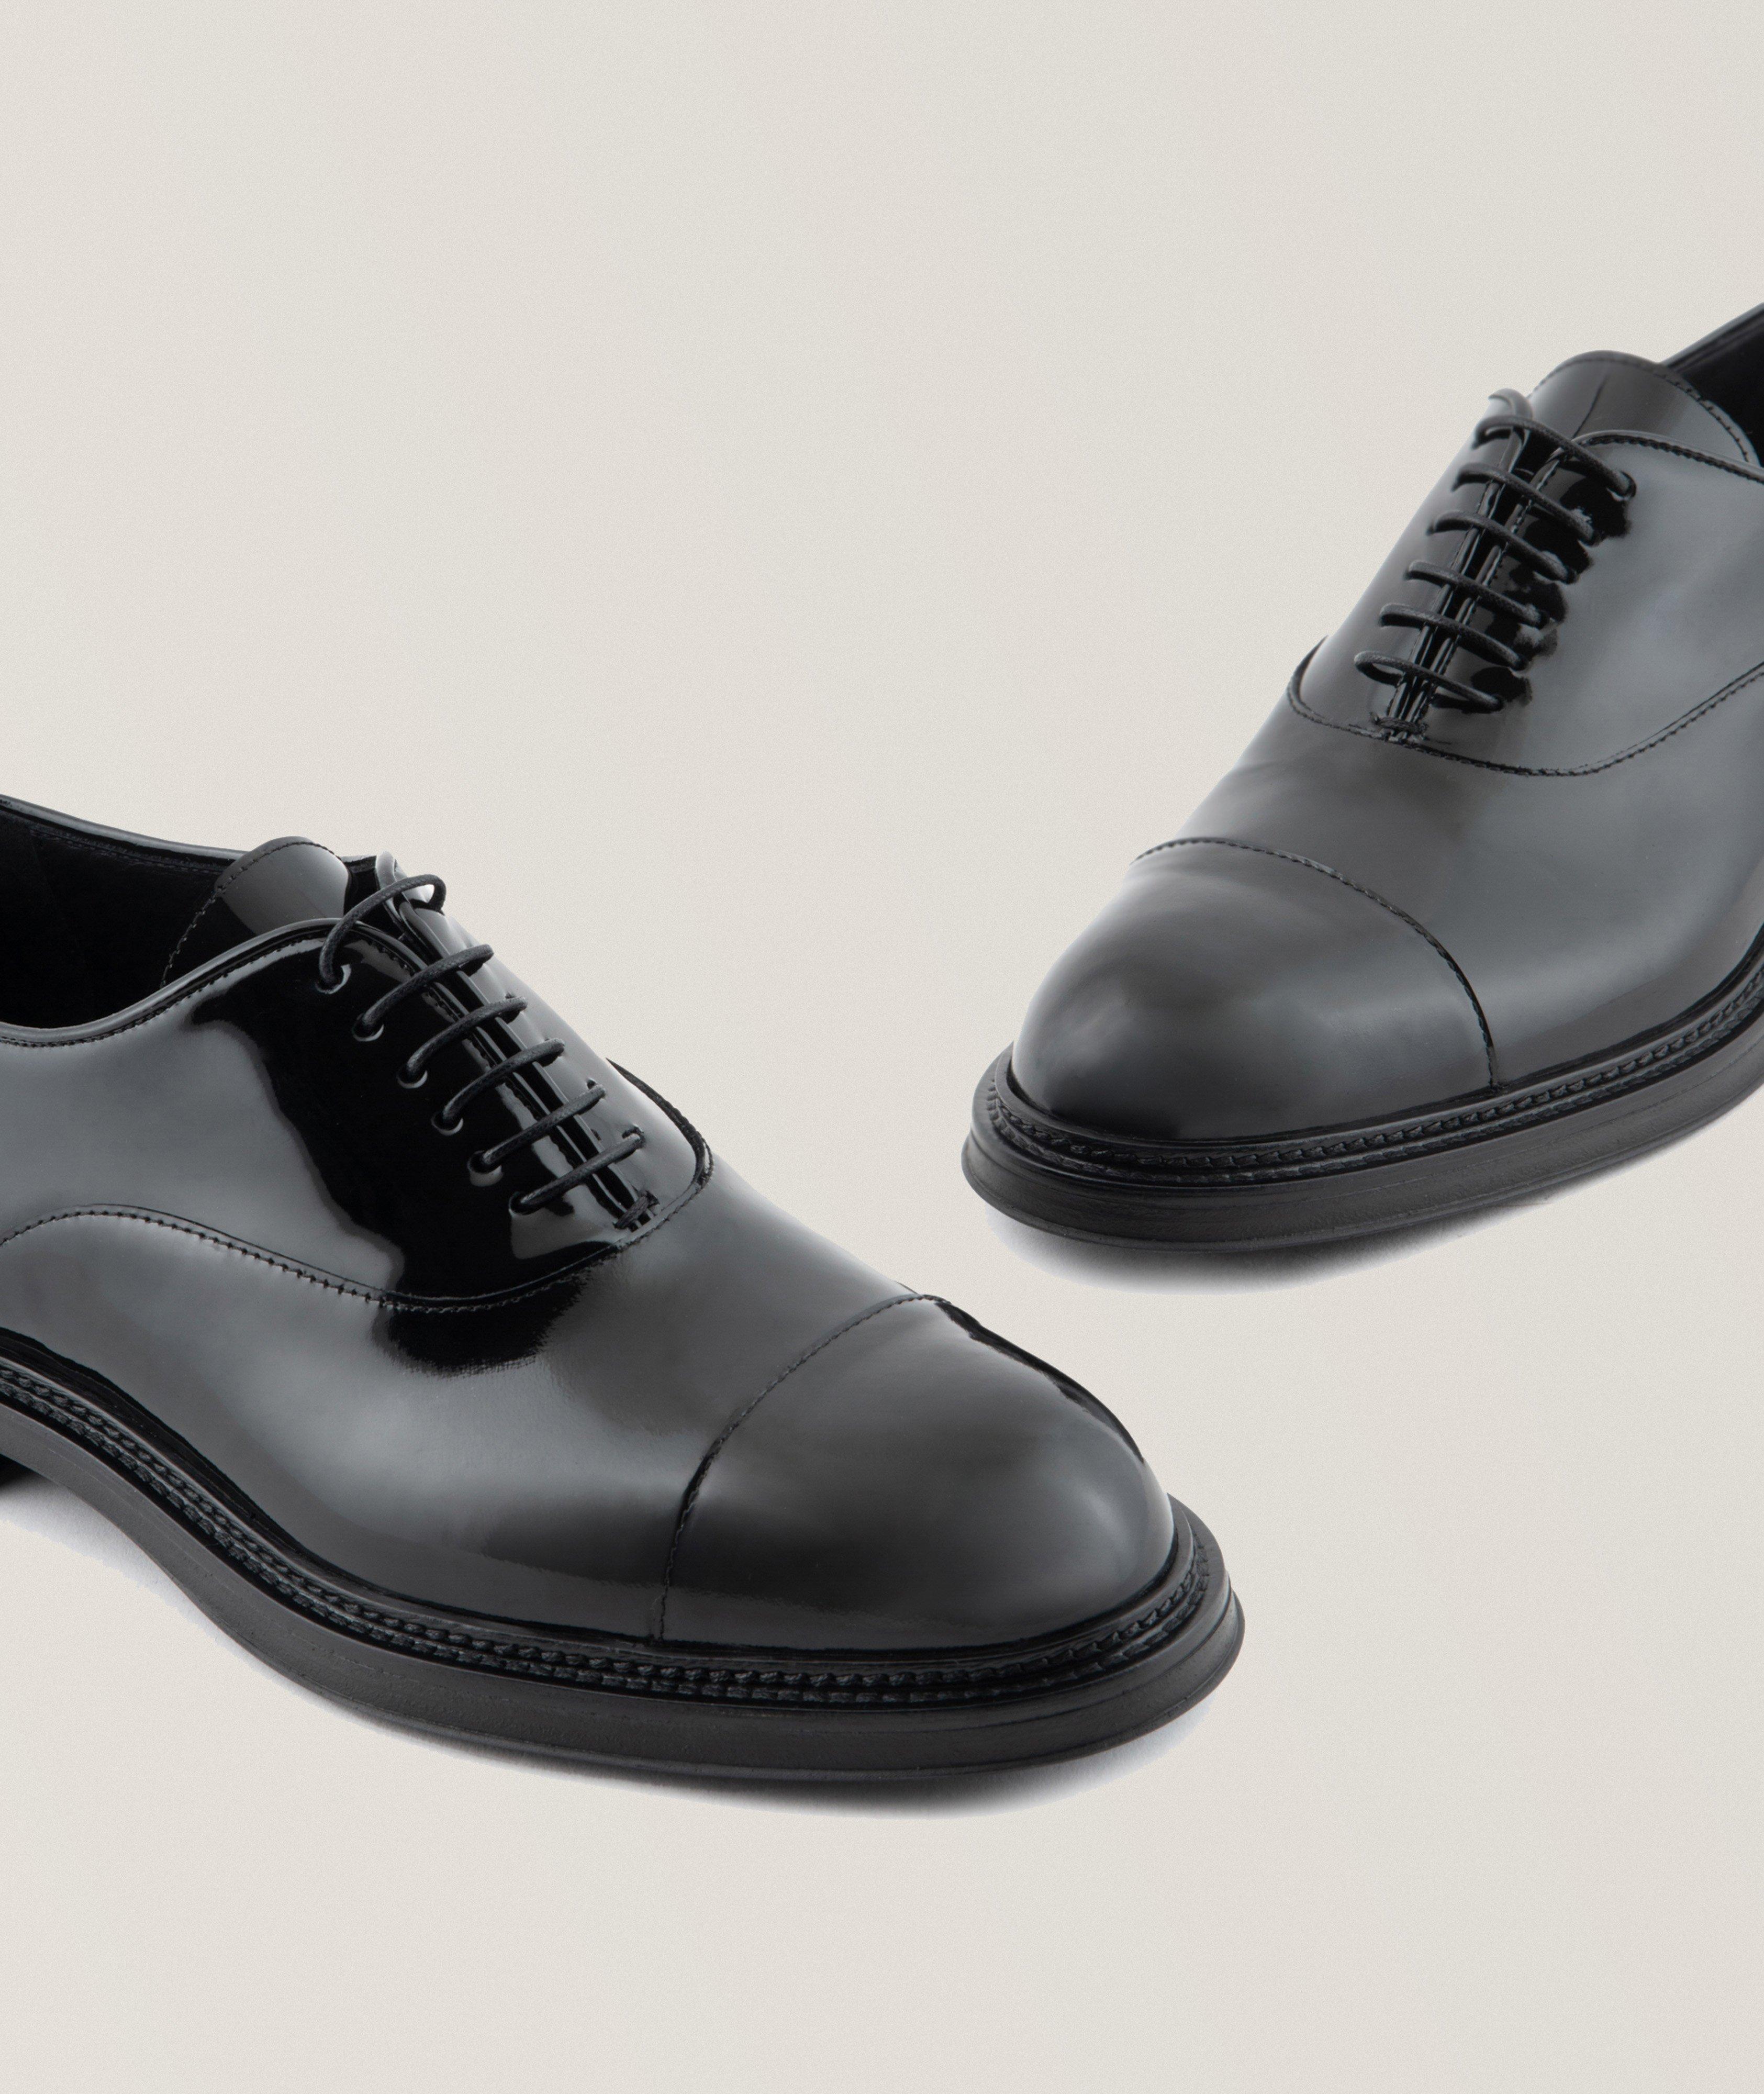 Patent Leather Oxfords image 4